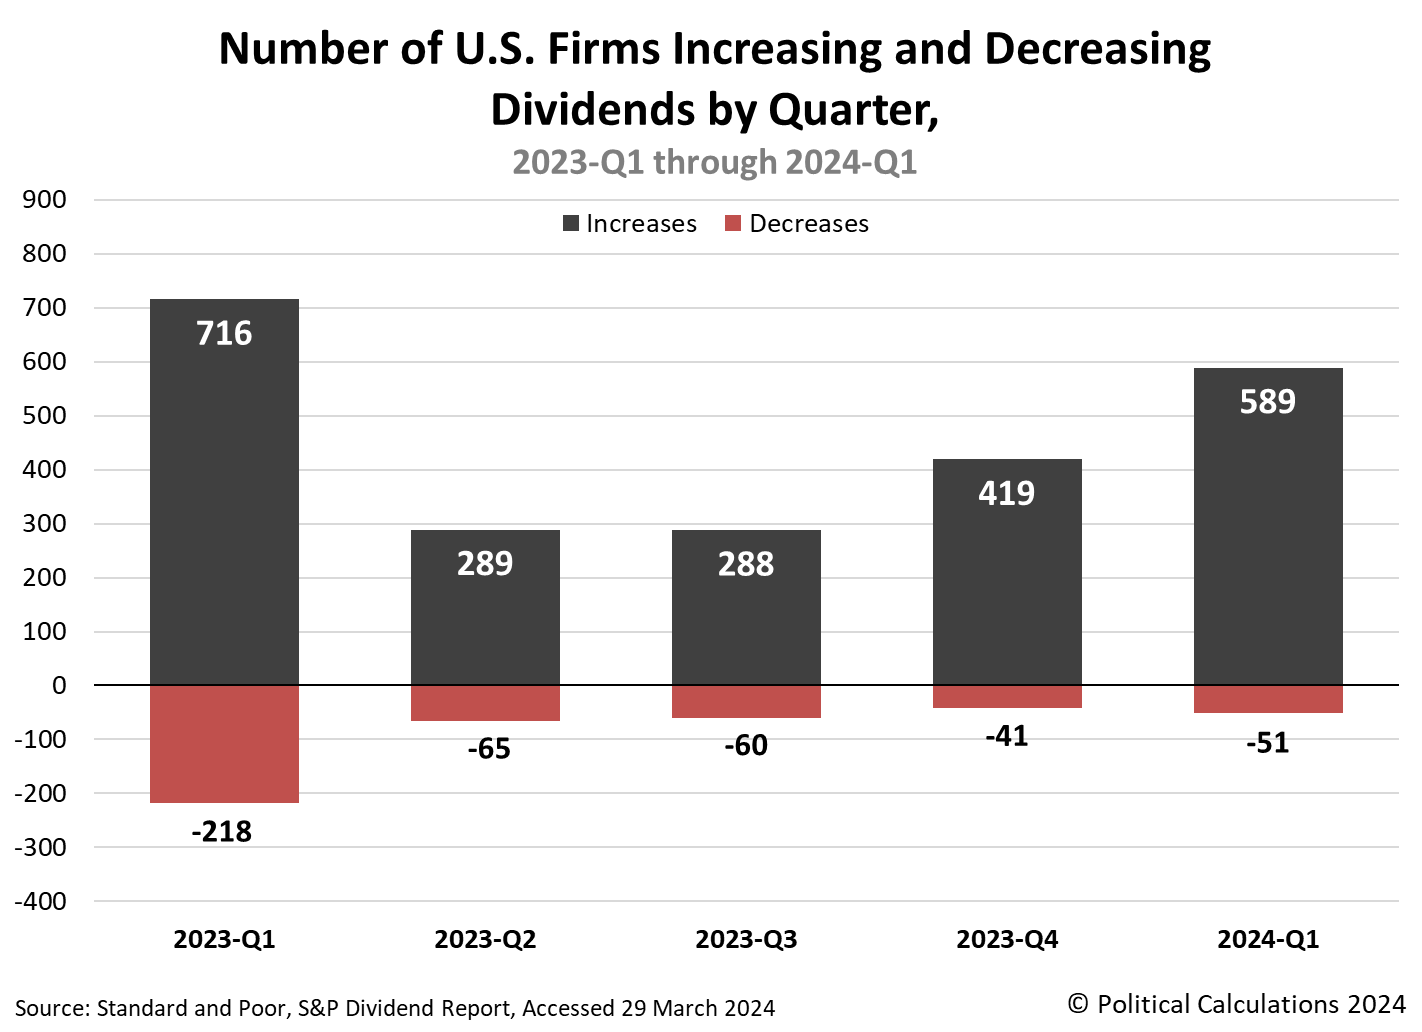 Number of U.S. Firms Increasing and Decreasing Dividends by Quarter, 2022-Q4 through 2023-Q4